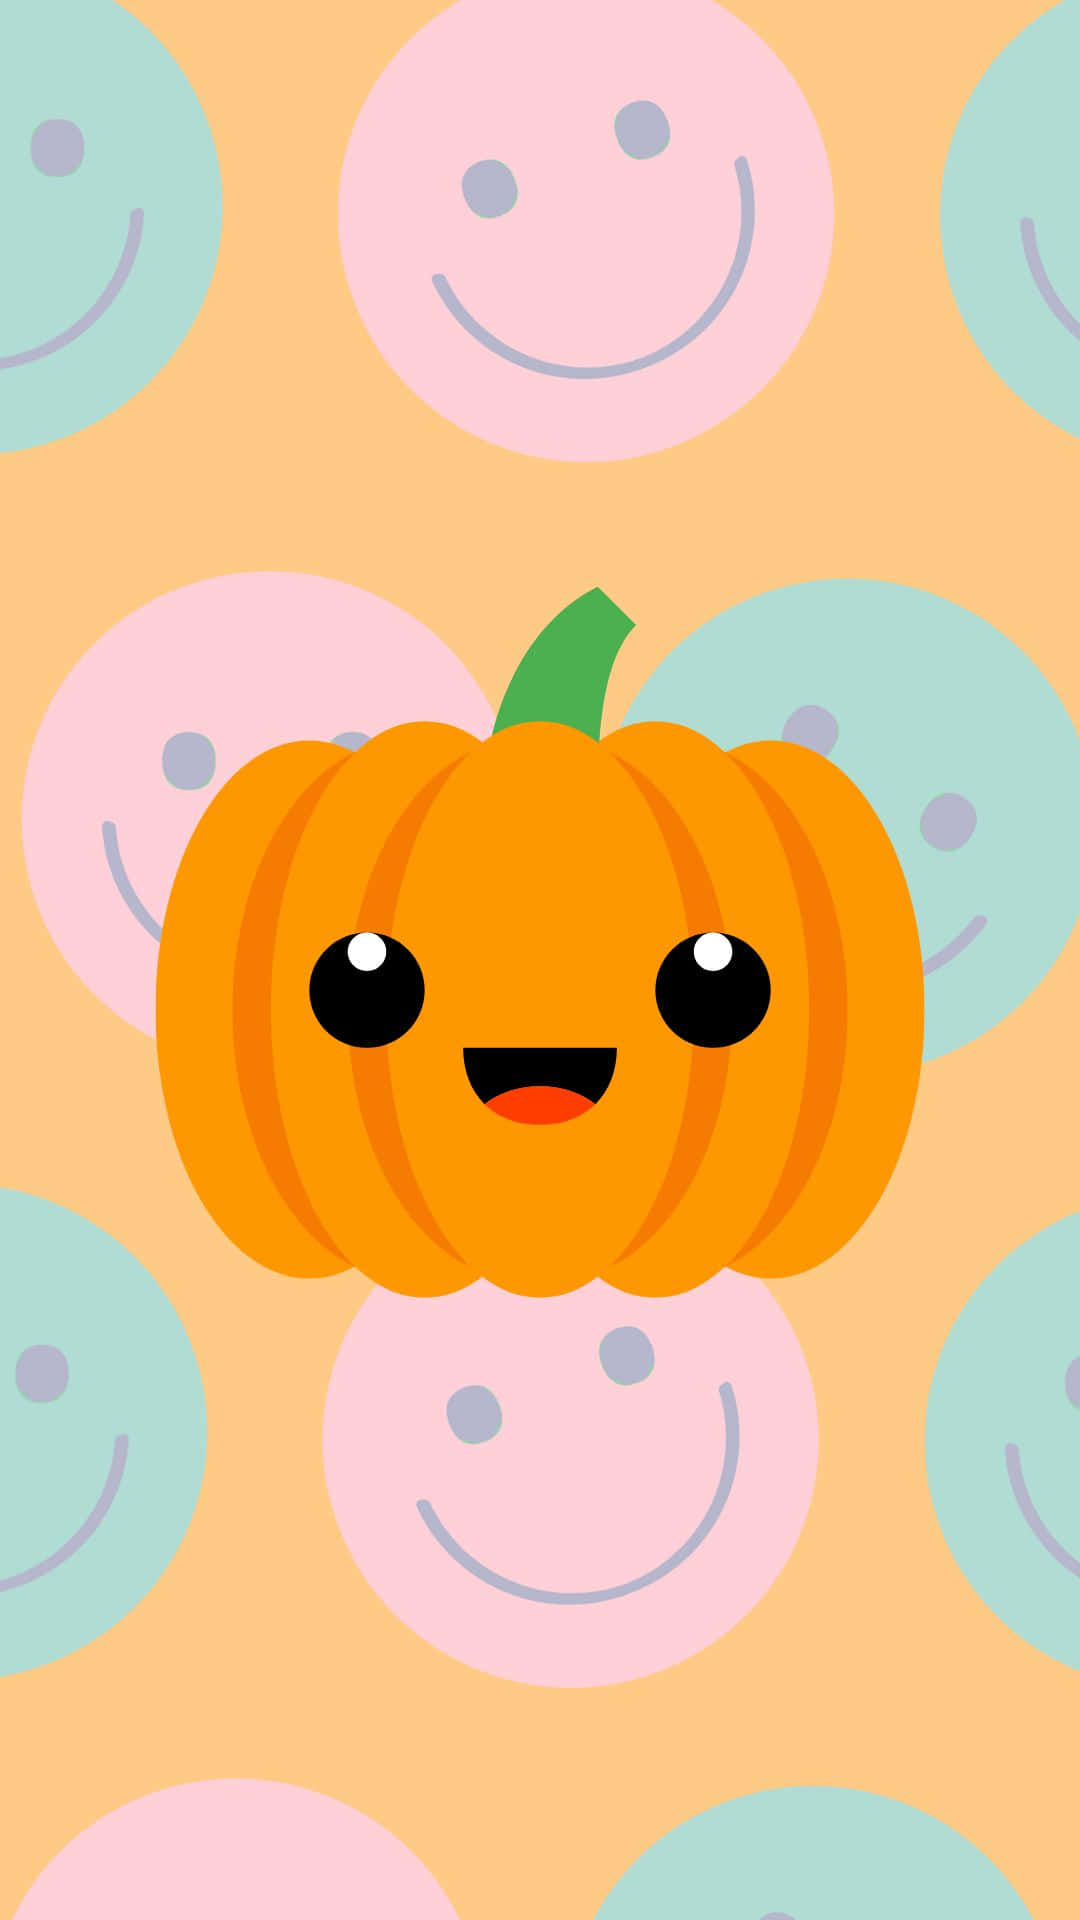 Adorable Pumpkin Surrounded by Autumn Leaves Wallpaper